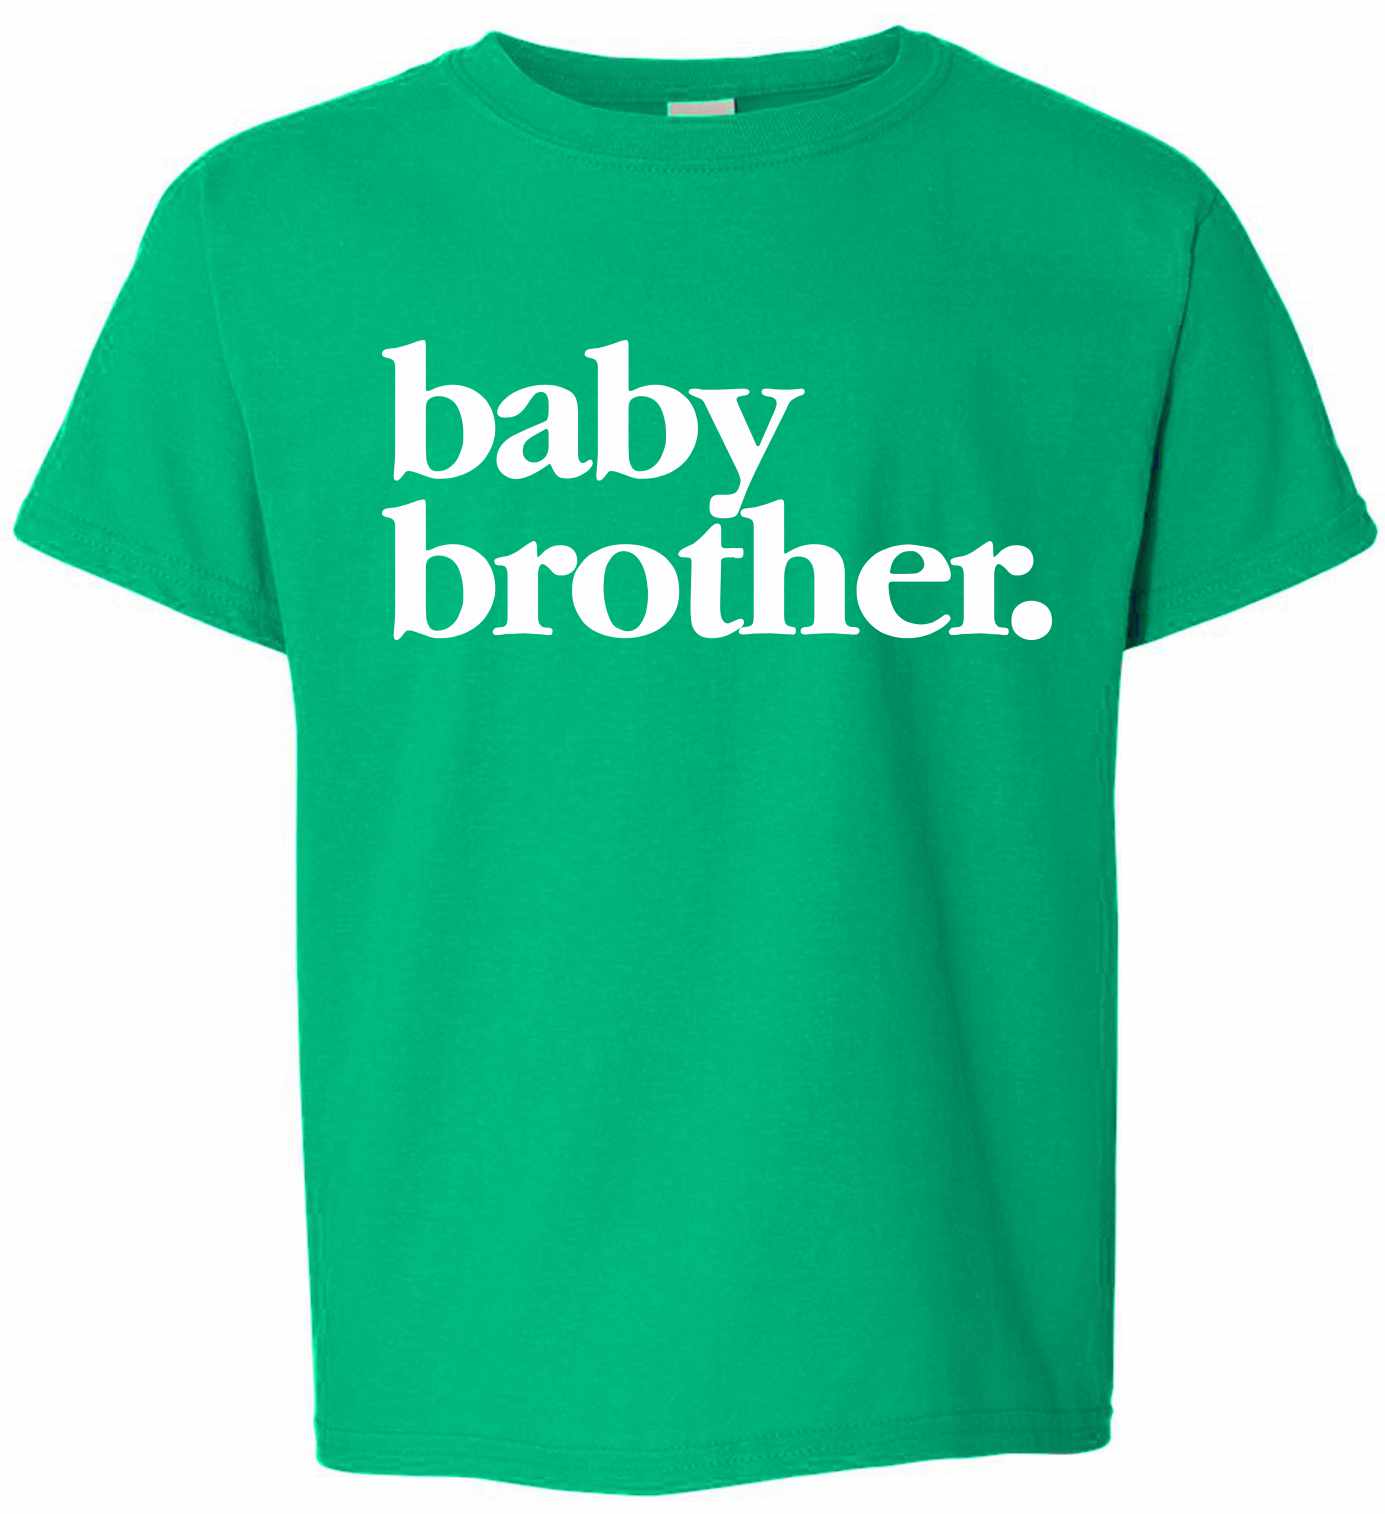 Baby Brother on Kids T-Shirt